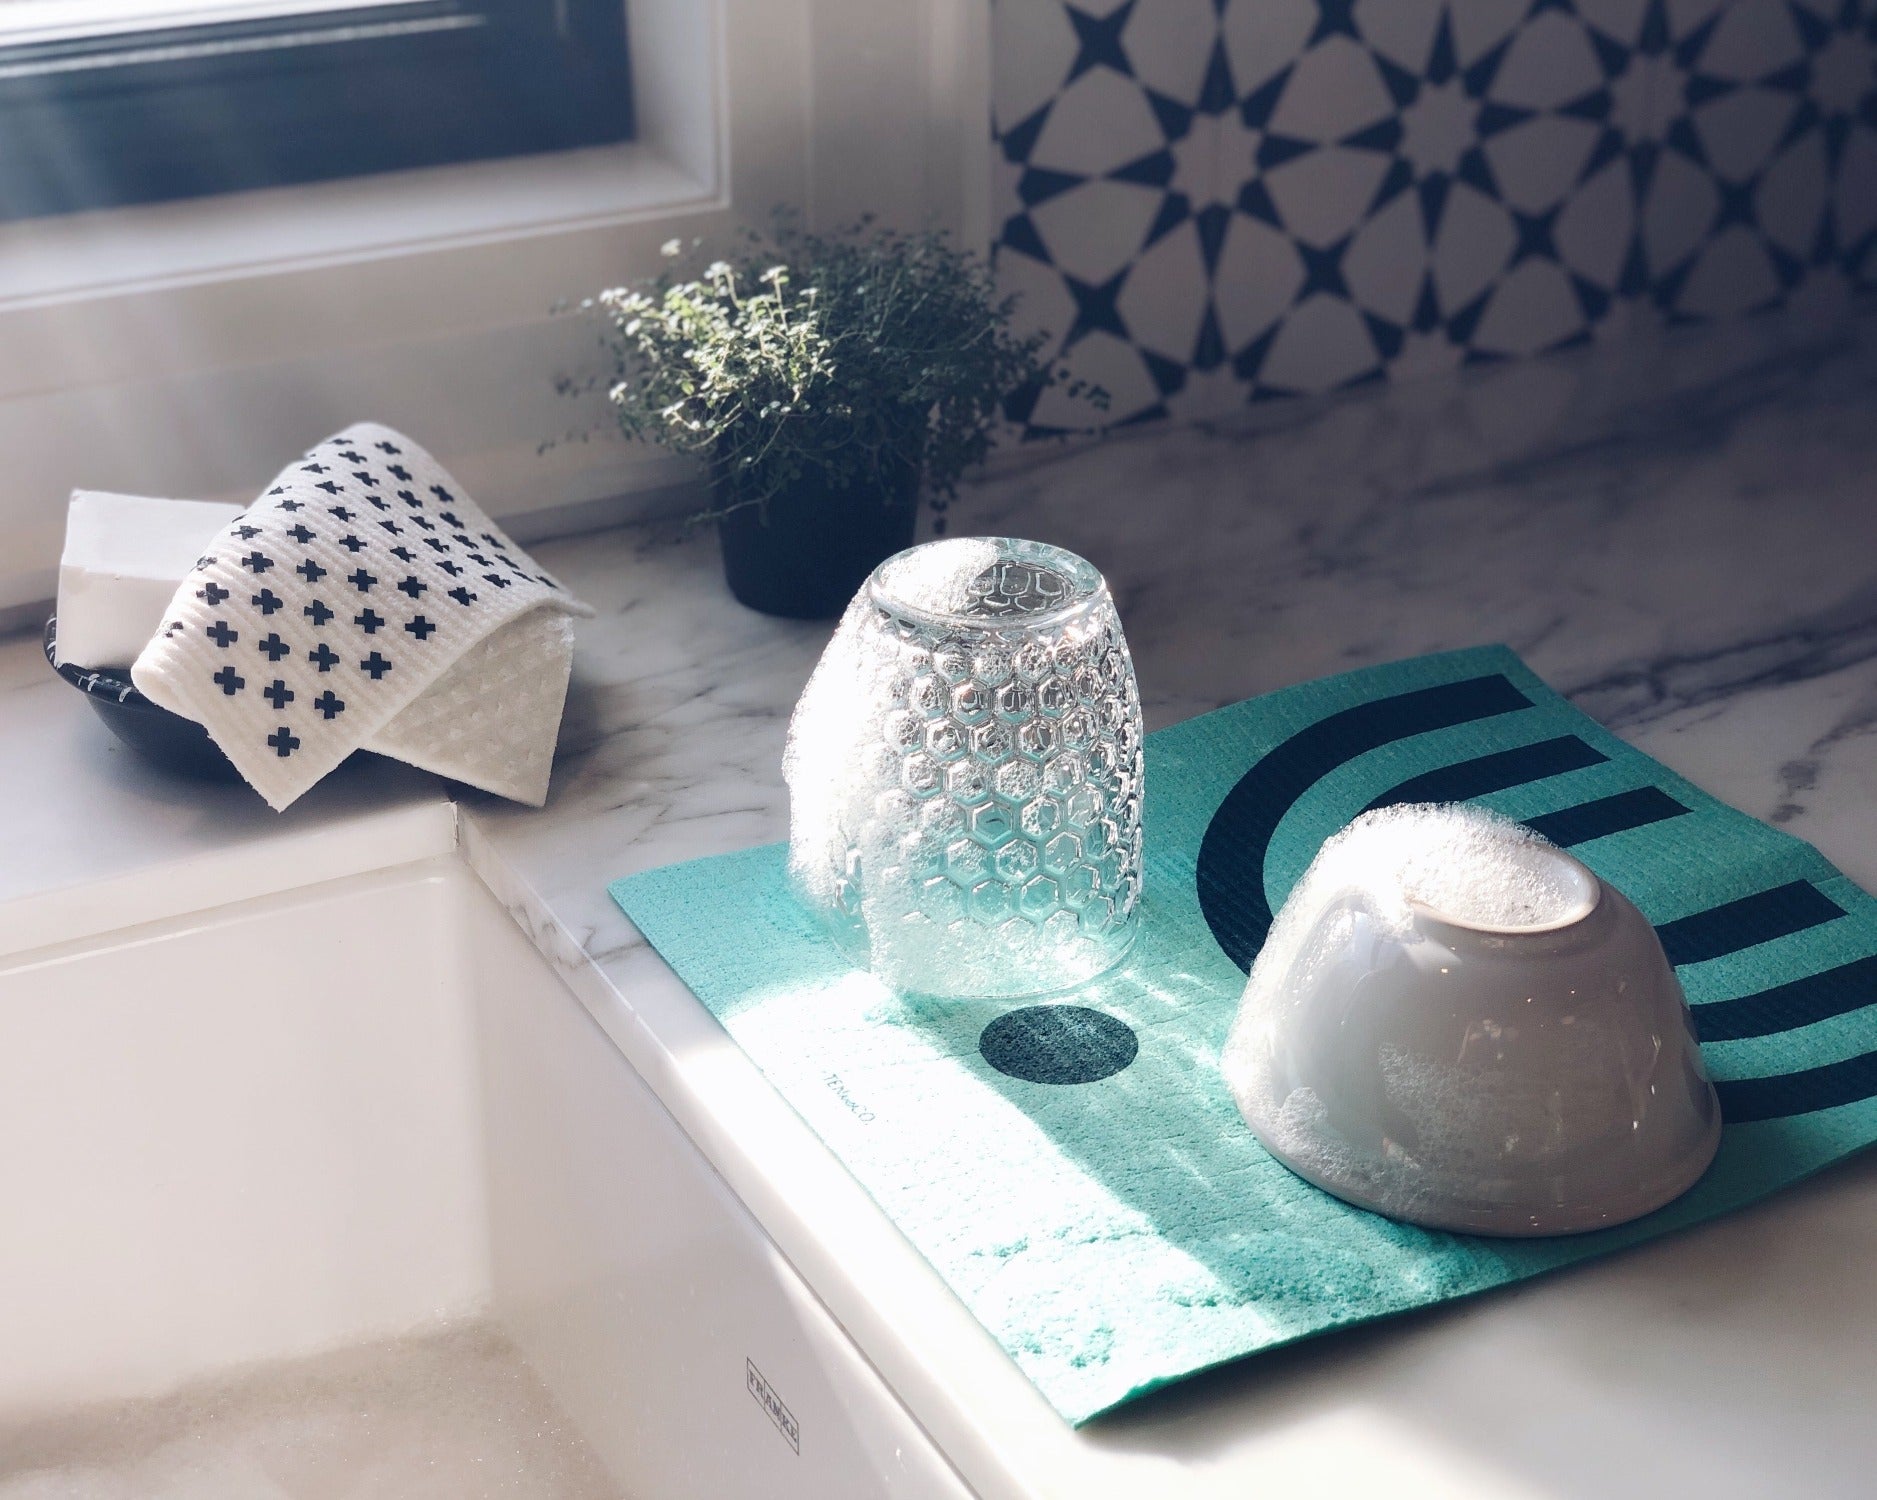 Product image of LARGE Arc Green Sponge Cloth Mat. There is a marble counter beside a white kitchen sink. On the counter is a LARGE Arc Green sponge cloth mat with a glass and a bowl upside down, drying. There is a soap dish with a Tiny X sponge cloth on it. Beside the soap dish is a small green plant. Above the sink is a window with sun shining through on the sponge cloth mat. 